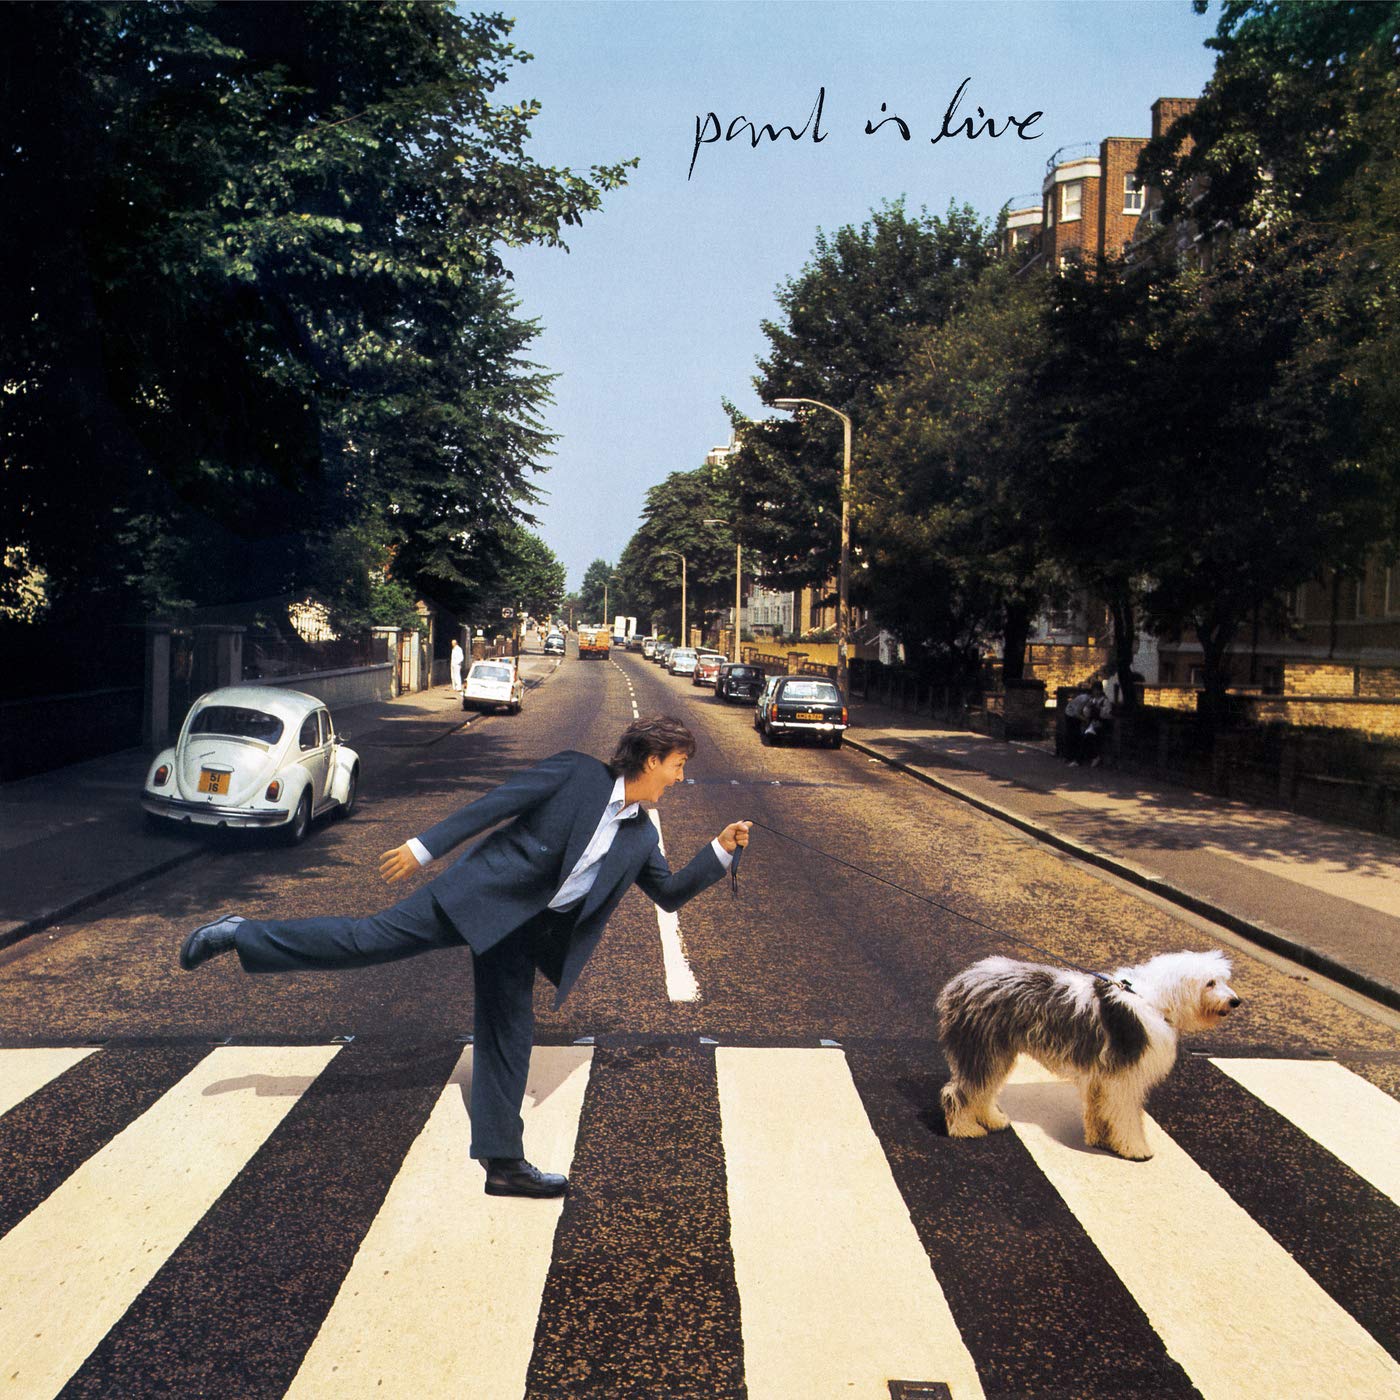 Paul McCartney: Paul Is Live (remastered) (180g) 2 LPs*** Gatefold Cover